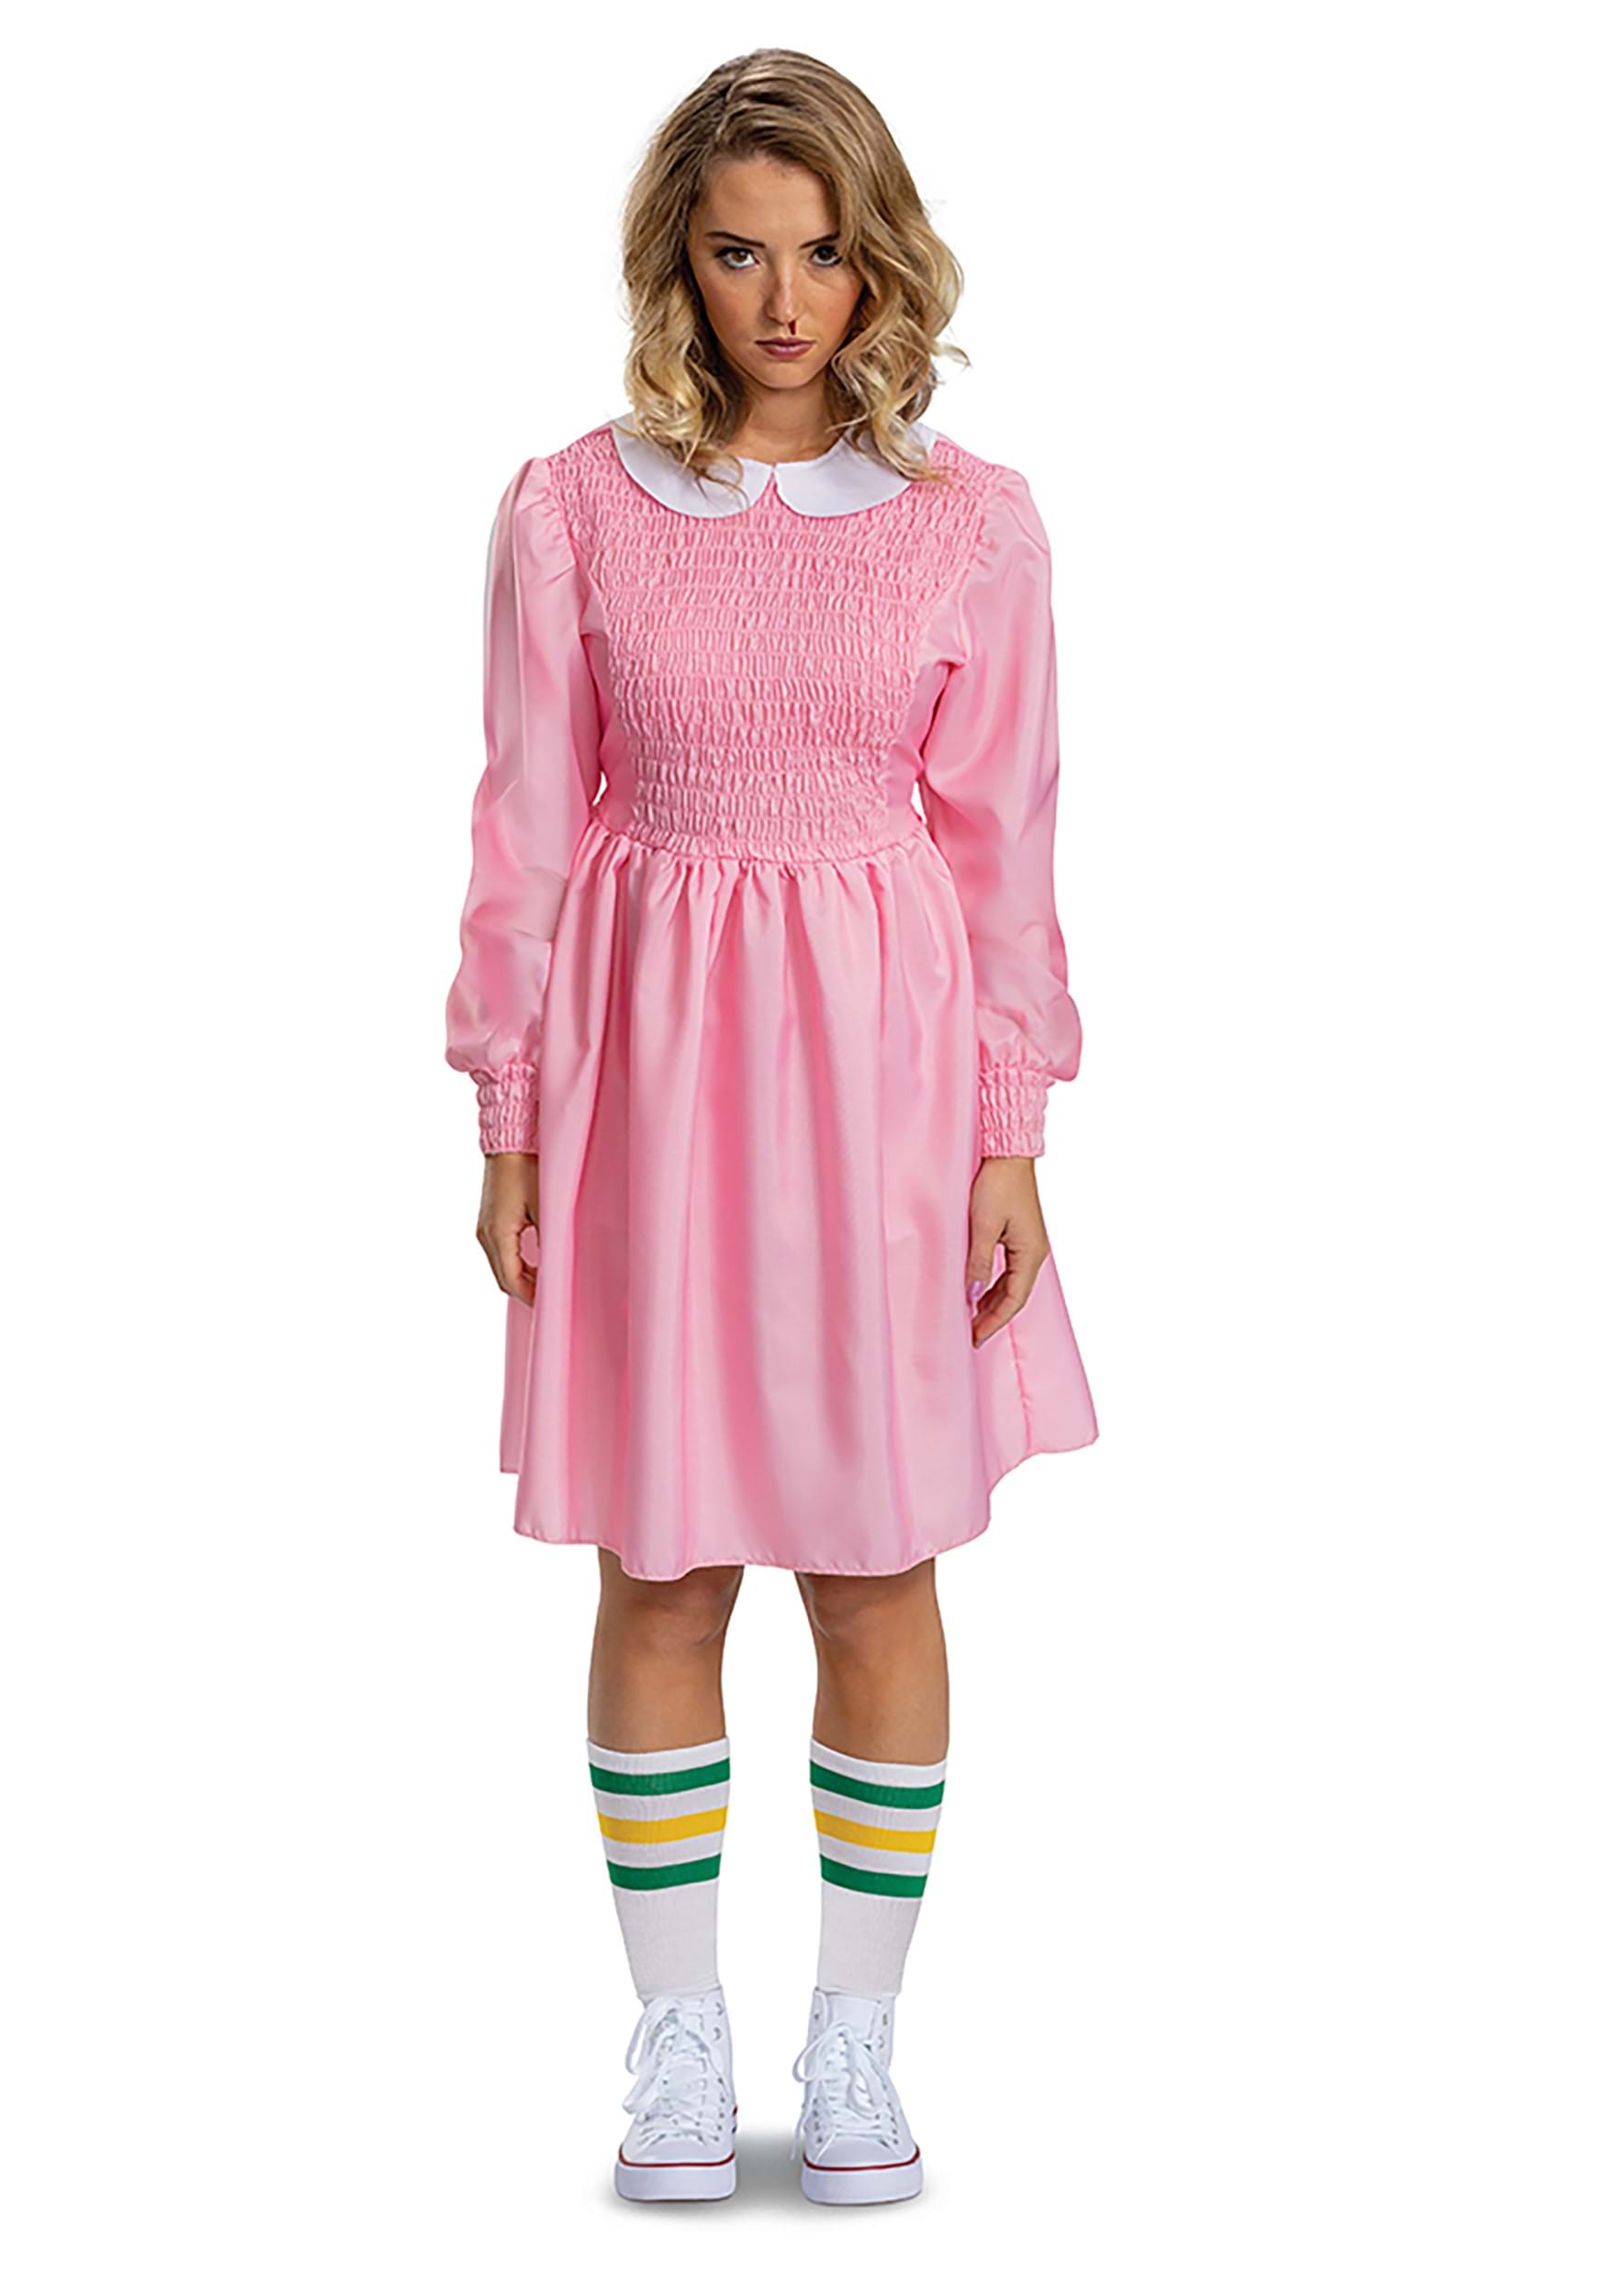 Photos - Fancy Dress Deluxe Disguise Eleven Women's Stranger Things Adult  Pink Dress Green/ 